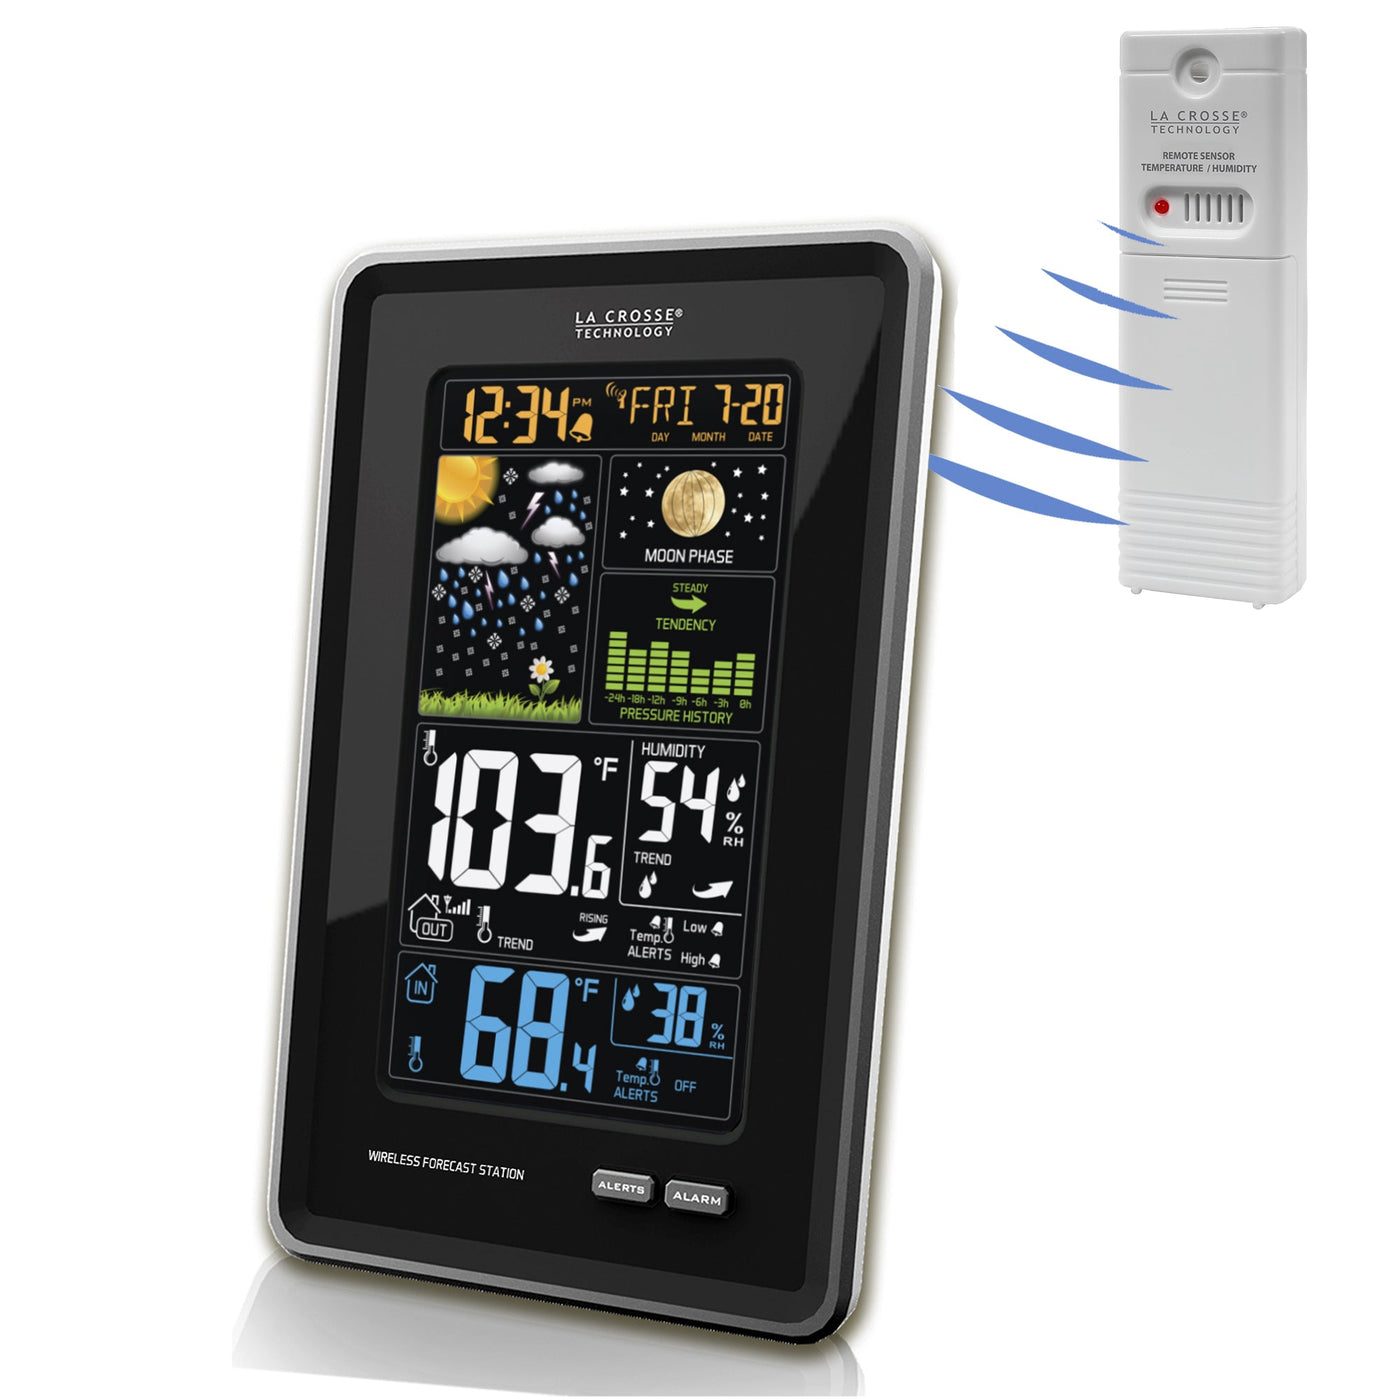 308-1425BV3 Wireless Color Forecast Station